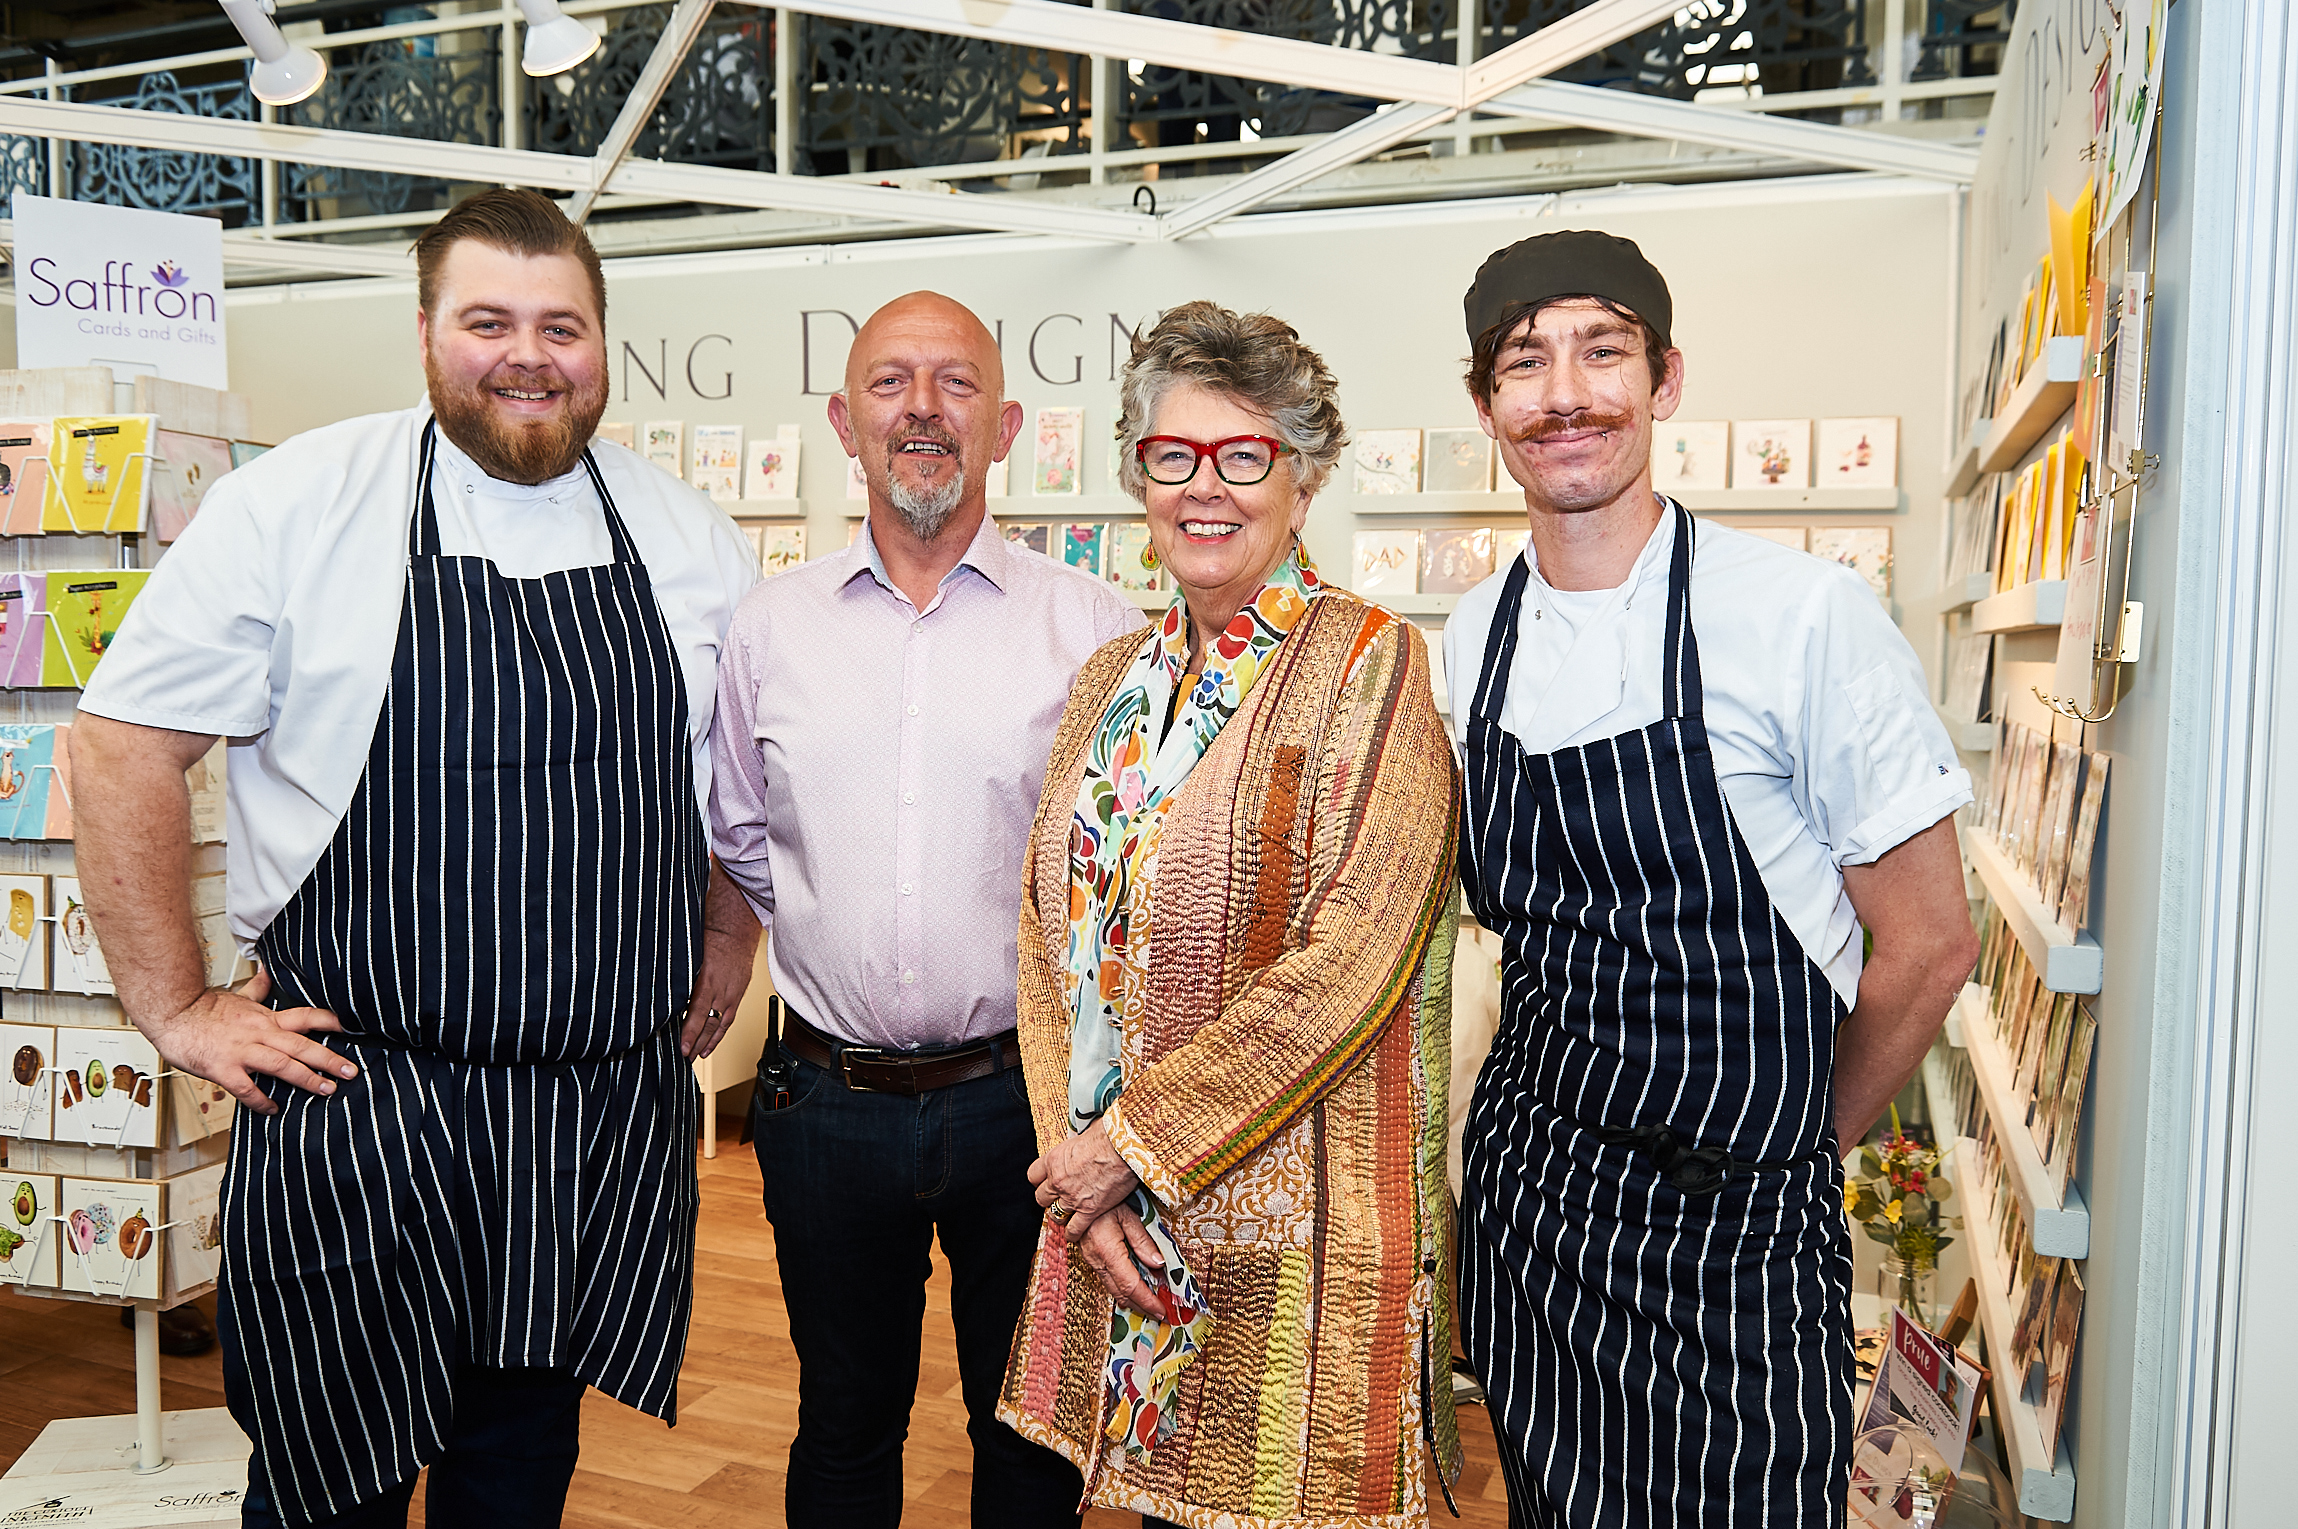 Above: Prue Leith with the BDC’s head chefs Michael Jellie (left), Dave Kulesza (right) and general manager of the venue’s catering company, Good Eating Company, Liam Keating.